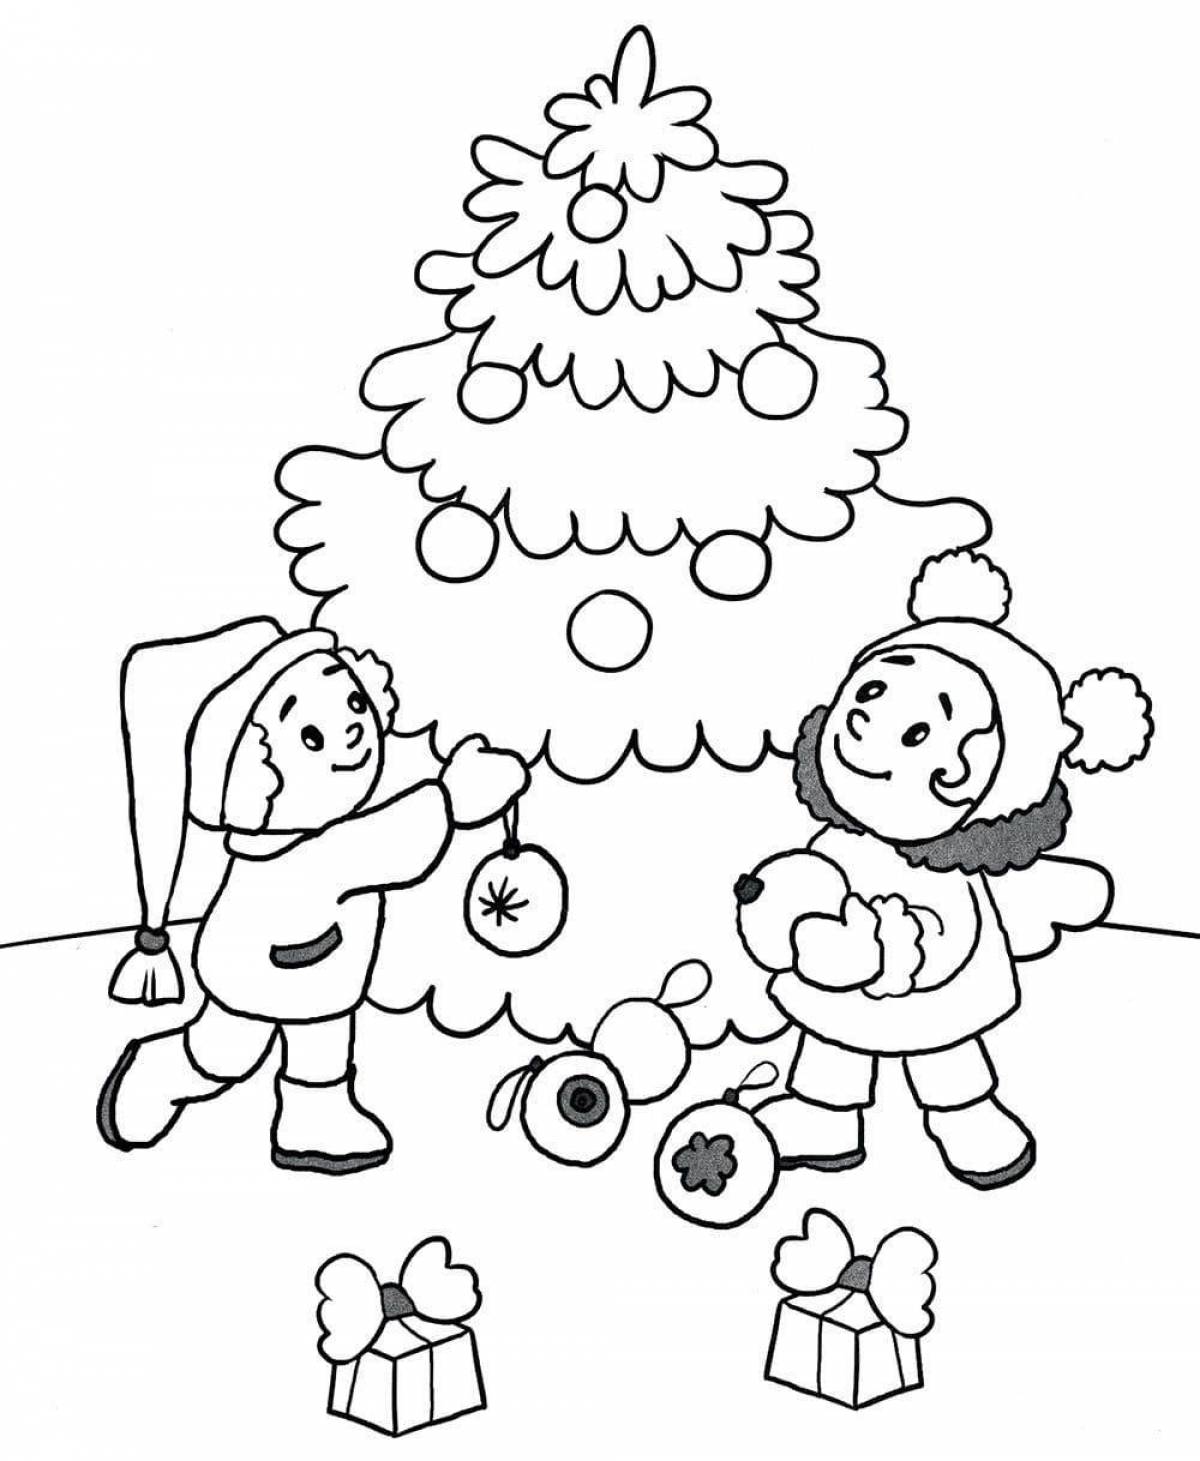 Live children's Christmas coloring book